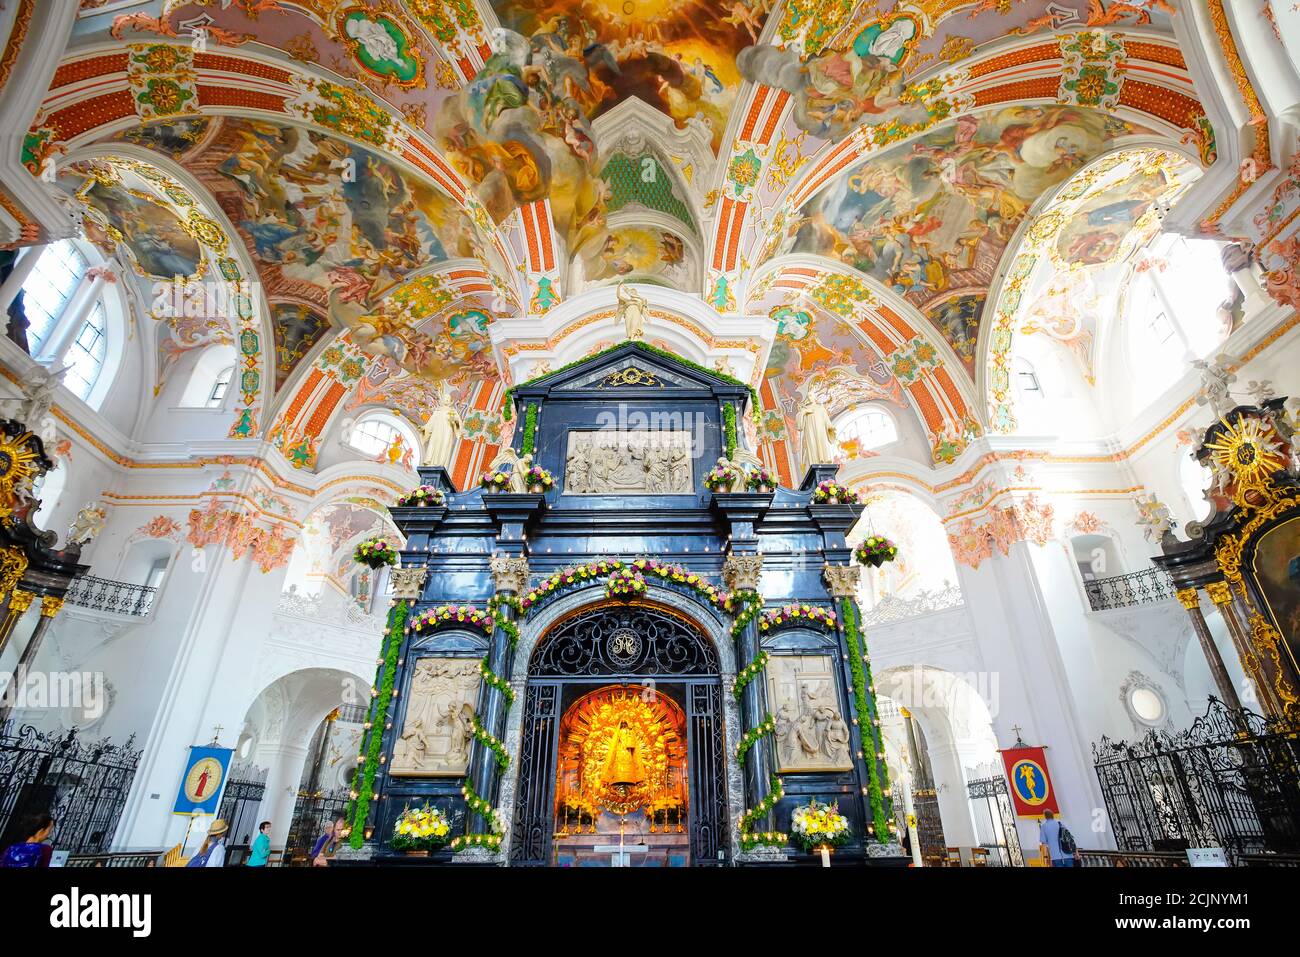 - einsiedeln Black photography hi-res stock madonna and monastery images Alamy swiss